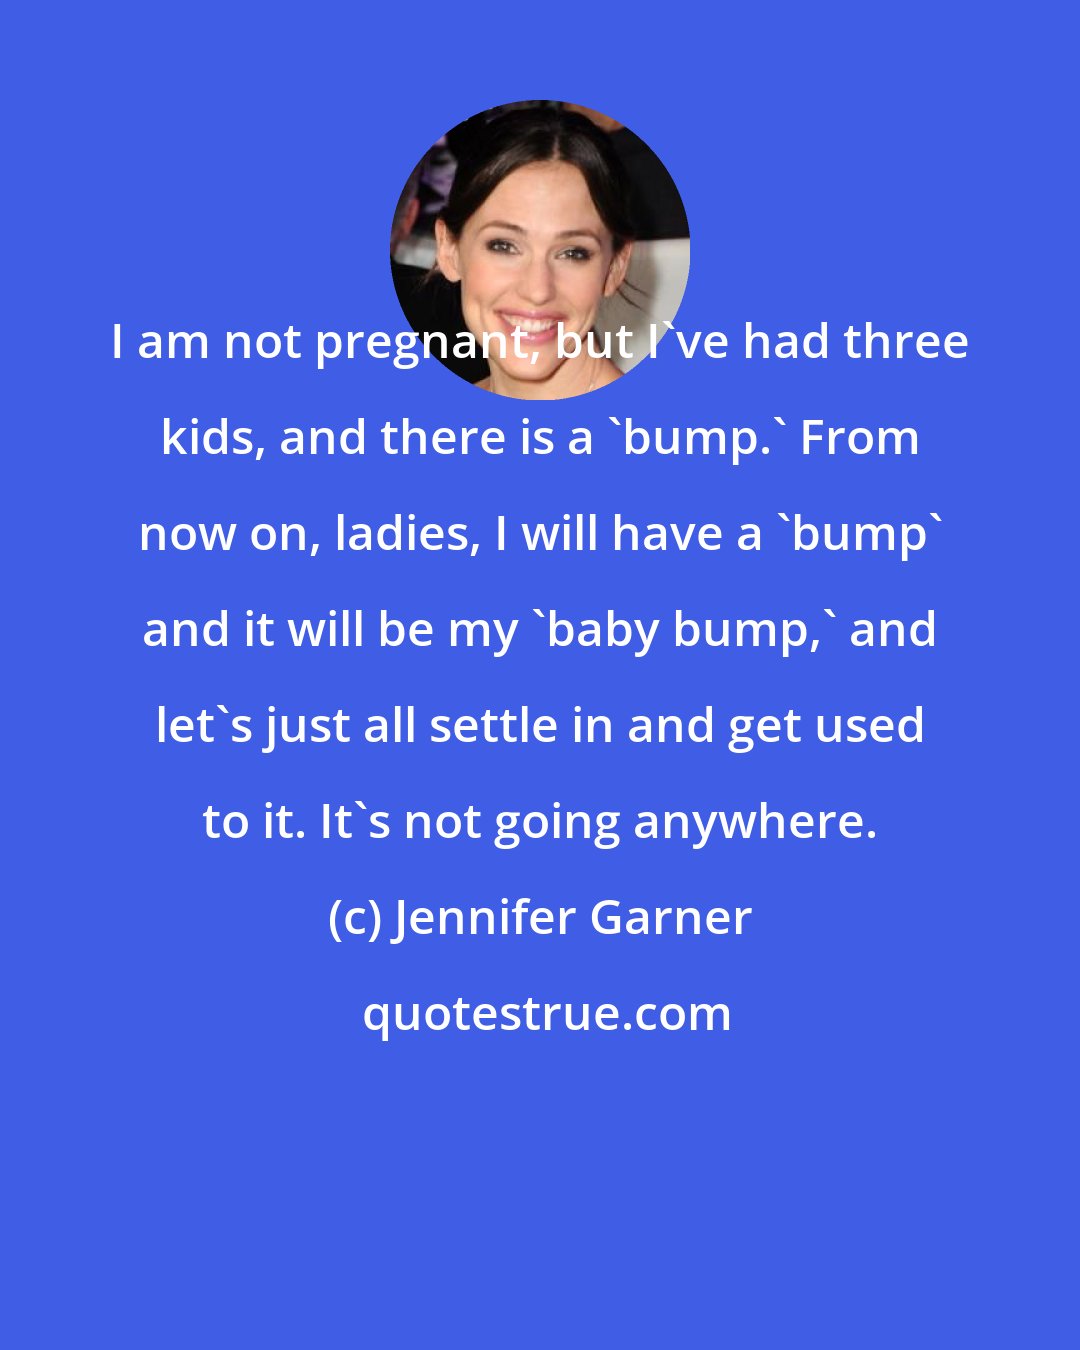 Jennifer Garner: I am not pregnant, but I've had three kids, and there is a 'bump.' From now on, ladies, I will have a 'bump' and it will be my 'baby bump,' and let's just all settle in and get used to it. It's not going anywhere.